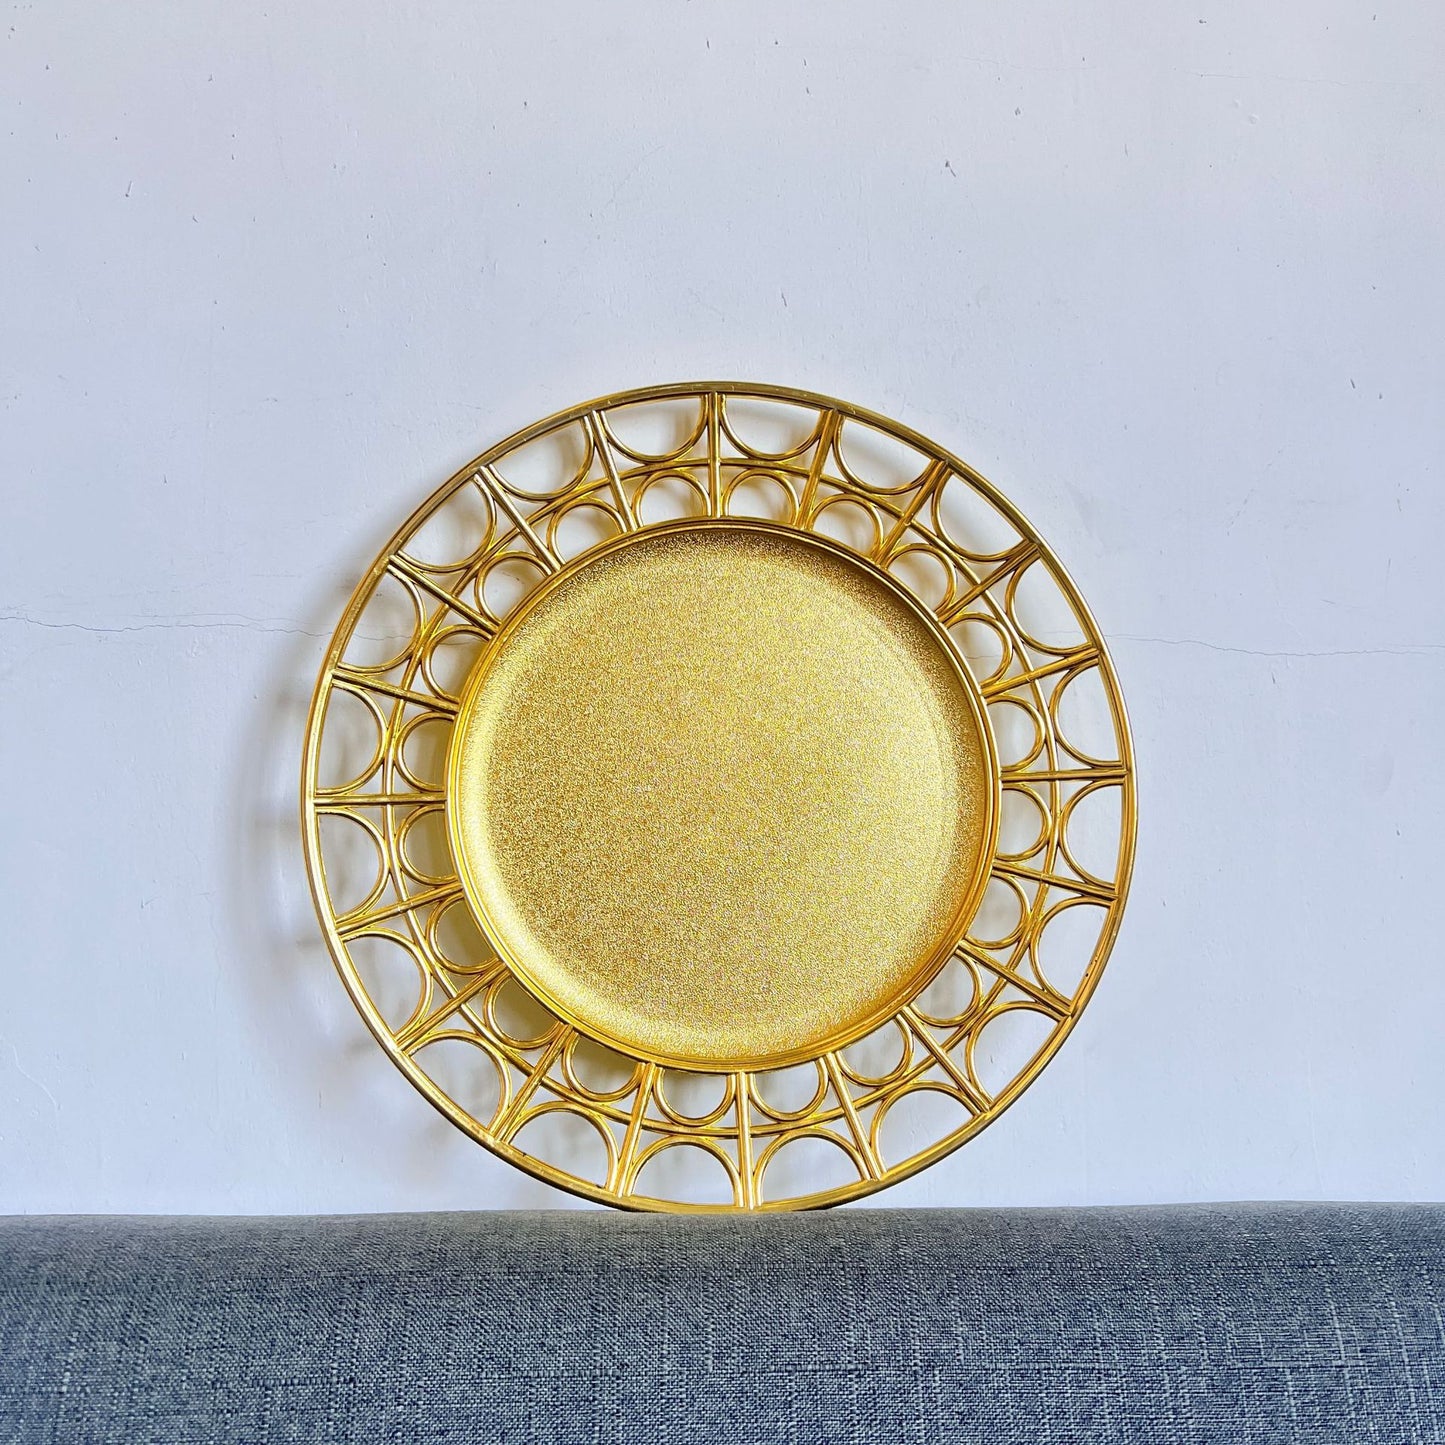 Uniquelina 13-Inch Charger Plates , Gold Textured Rim, for Elegant Dining - Ideal for Weddings and Formal Events